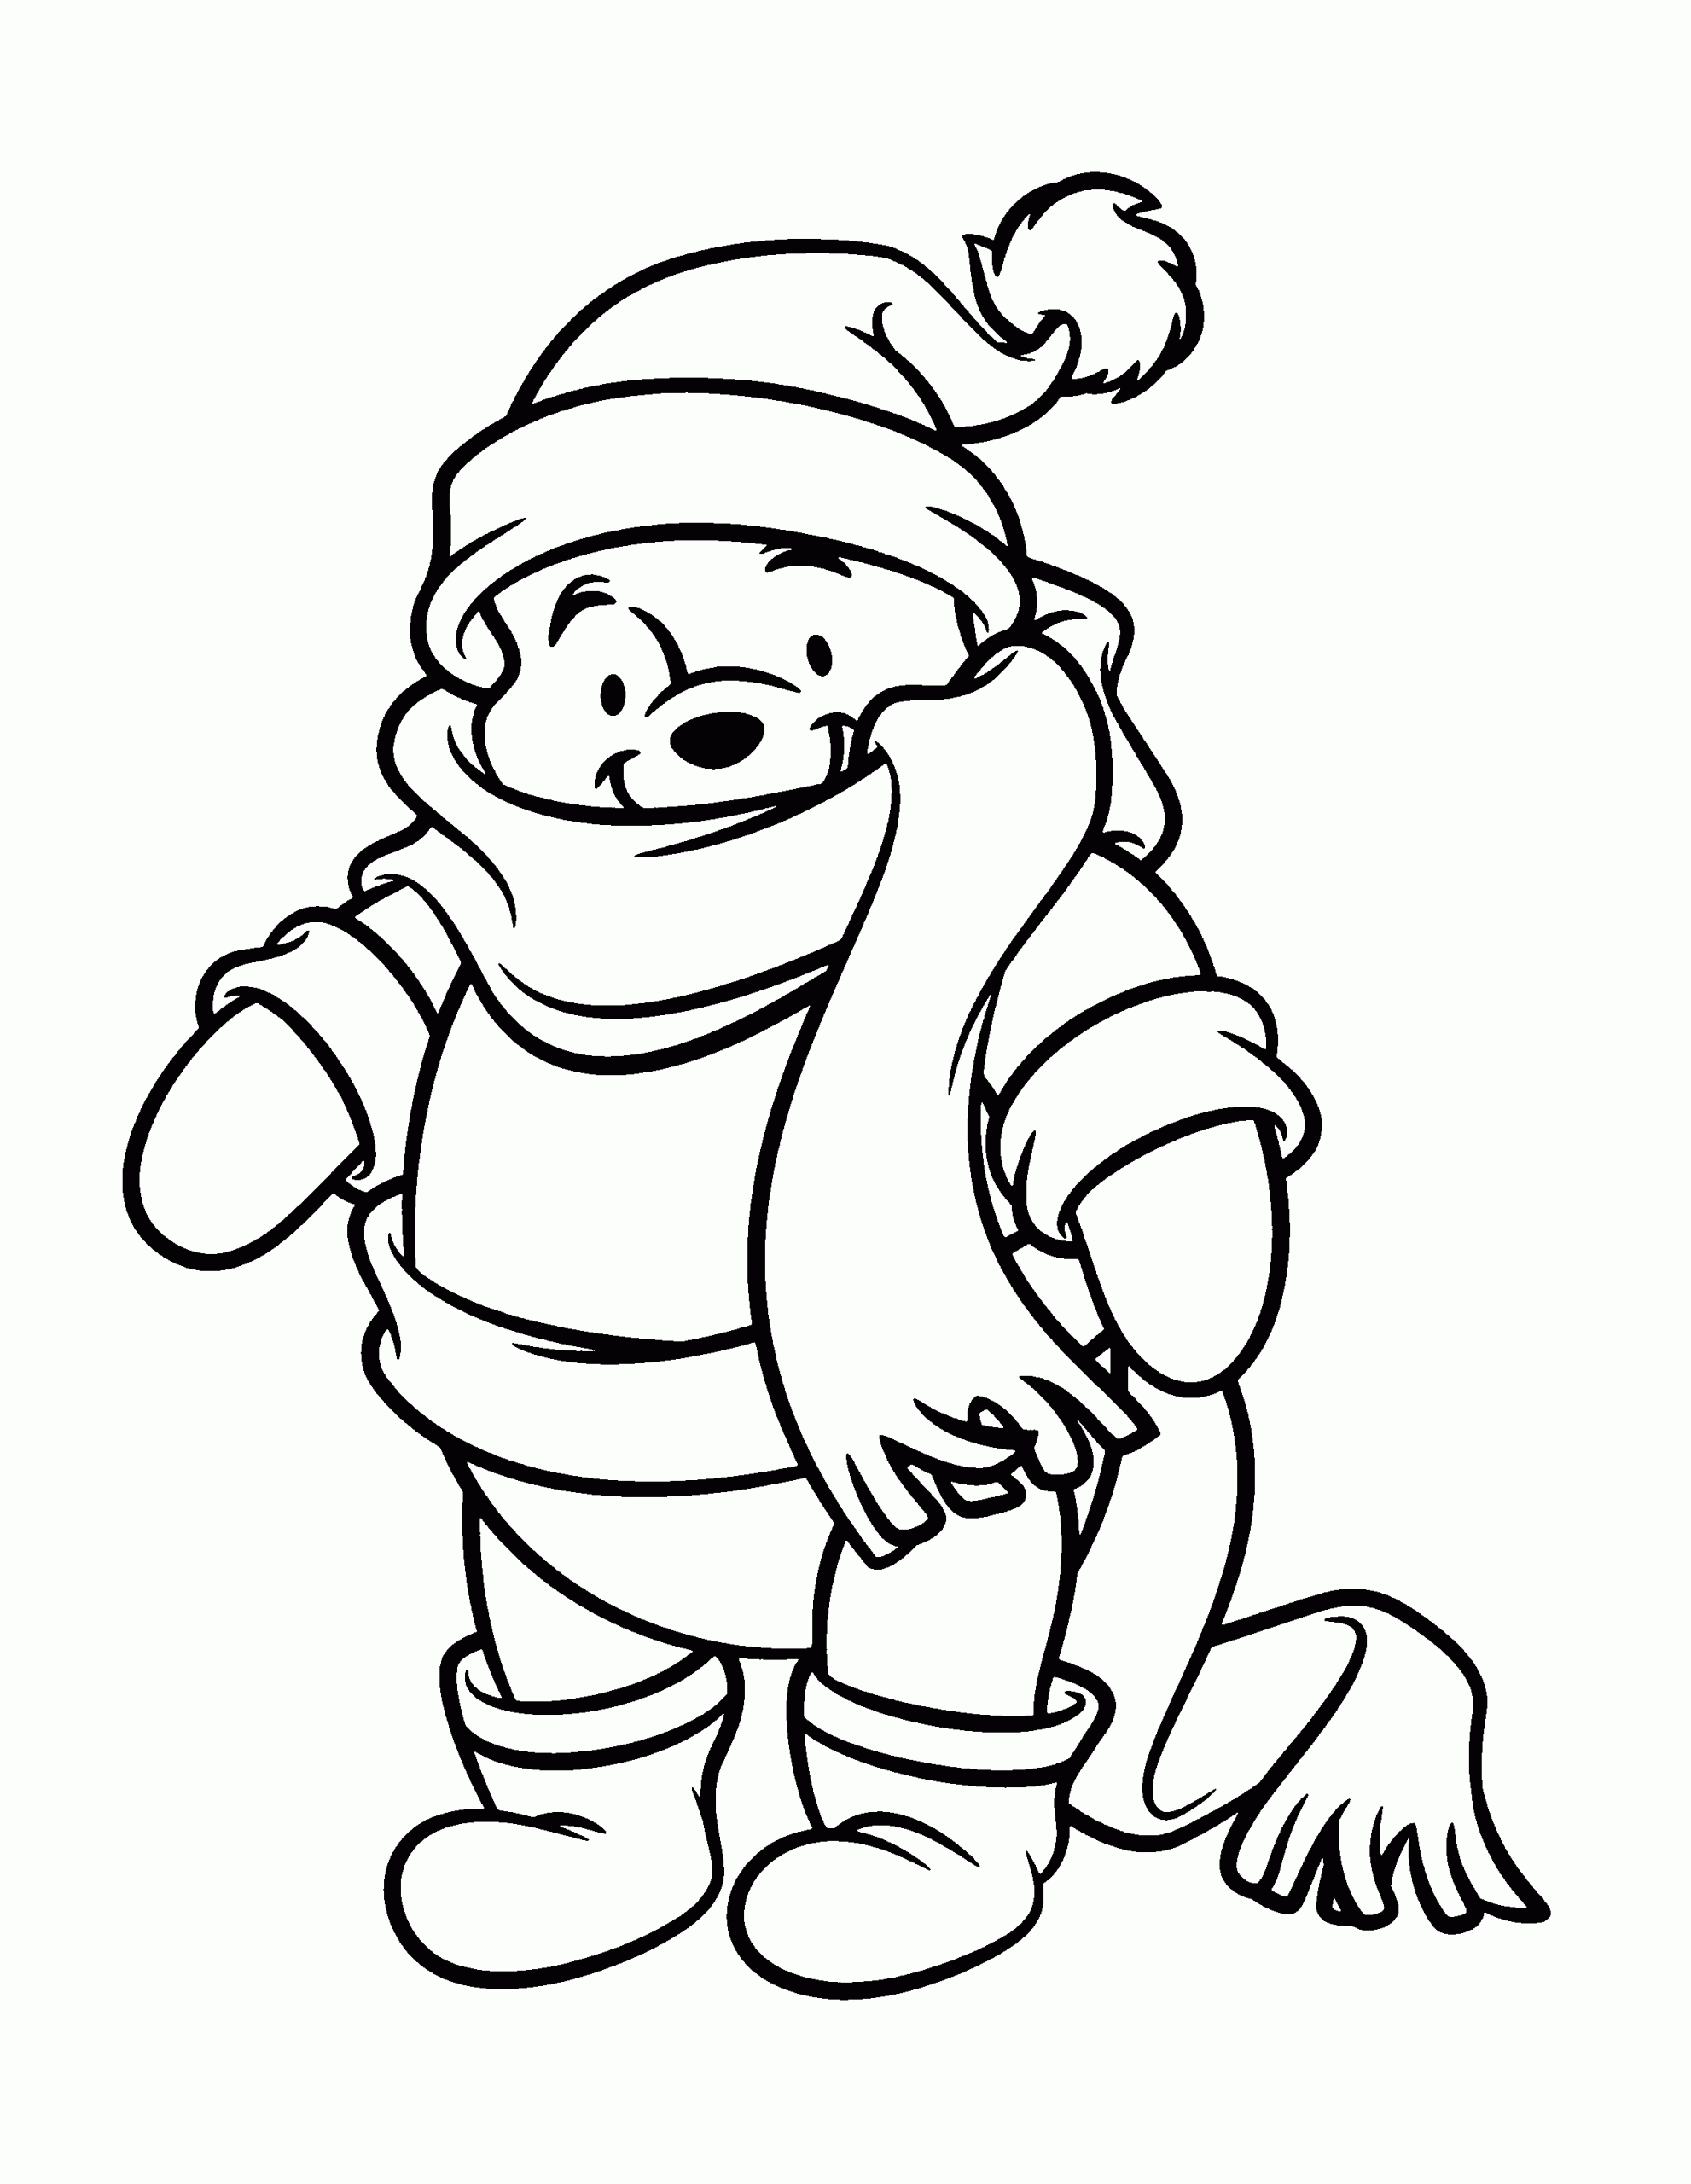 Baby Winnie The Pooh With Scarf Coloring Page